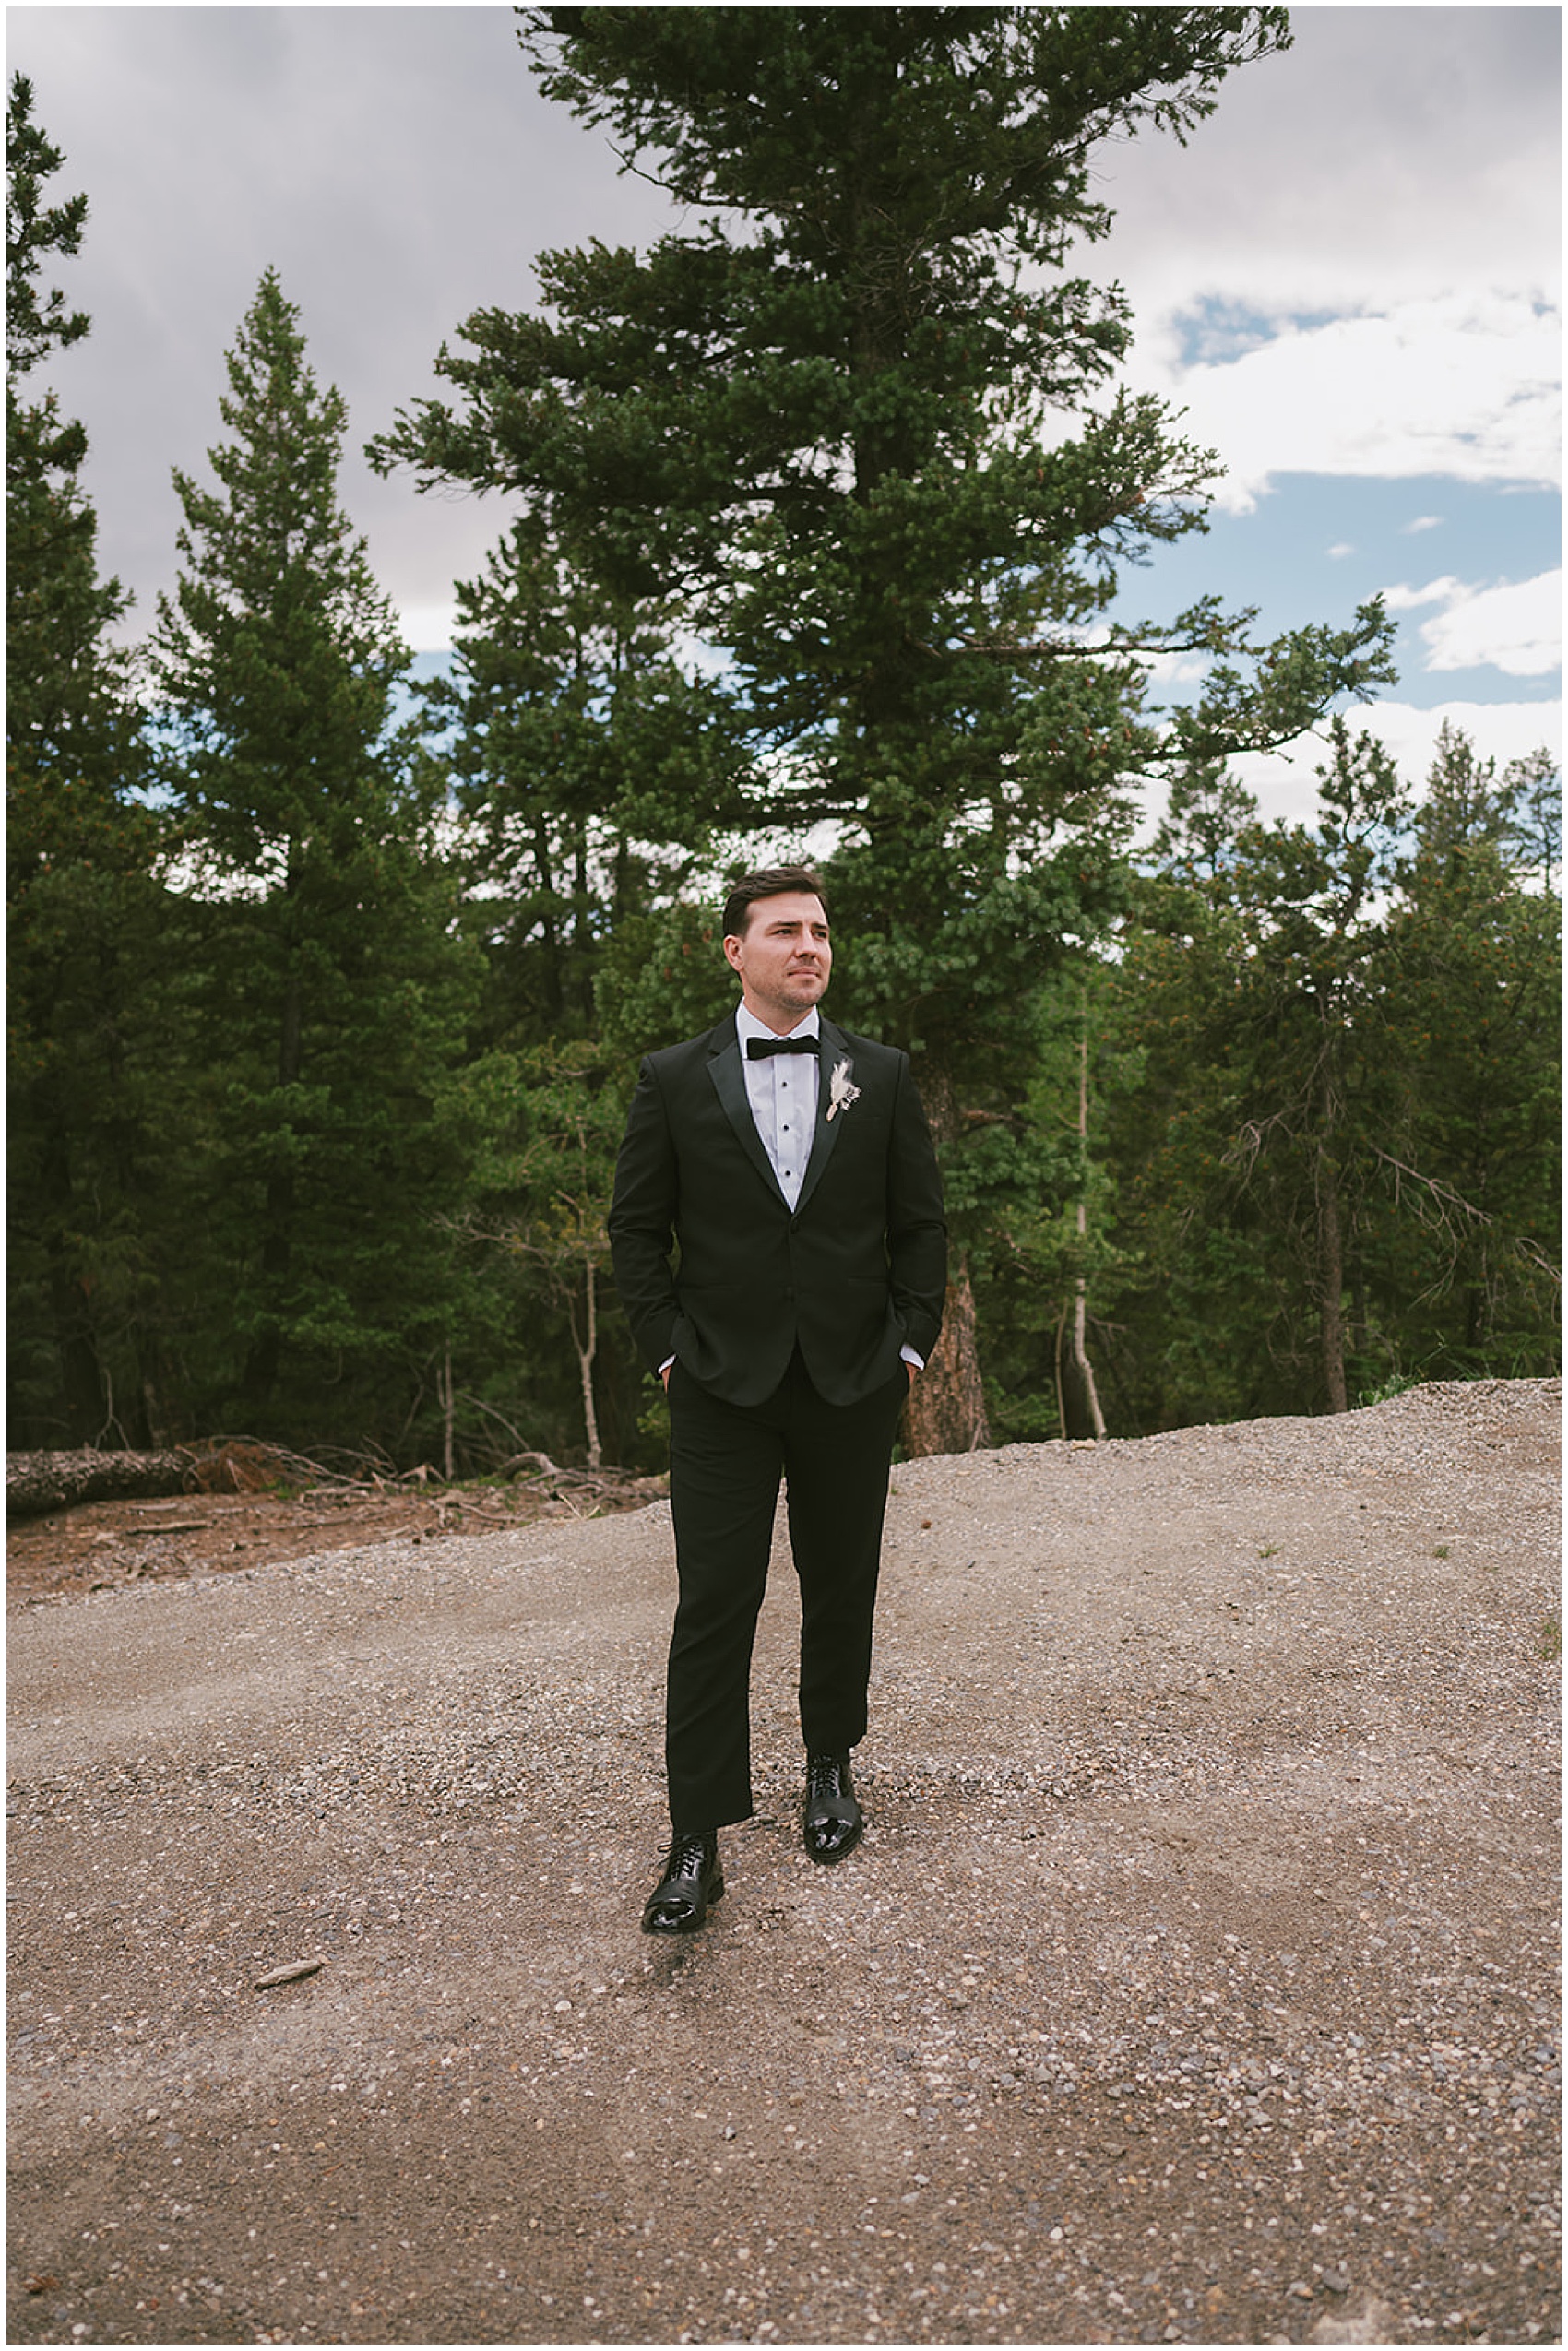 A groom in a black tuxedo stands on a gravel road with hands in pockets